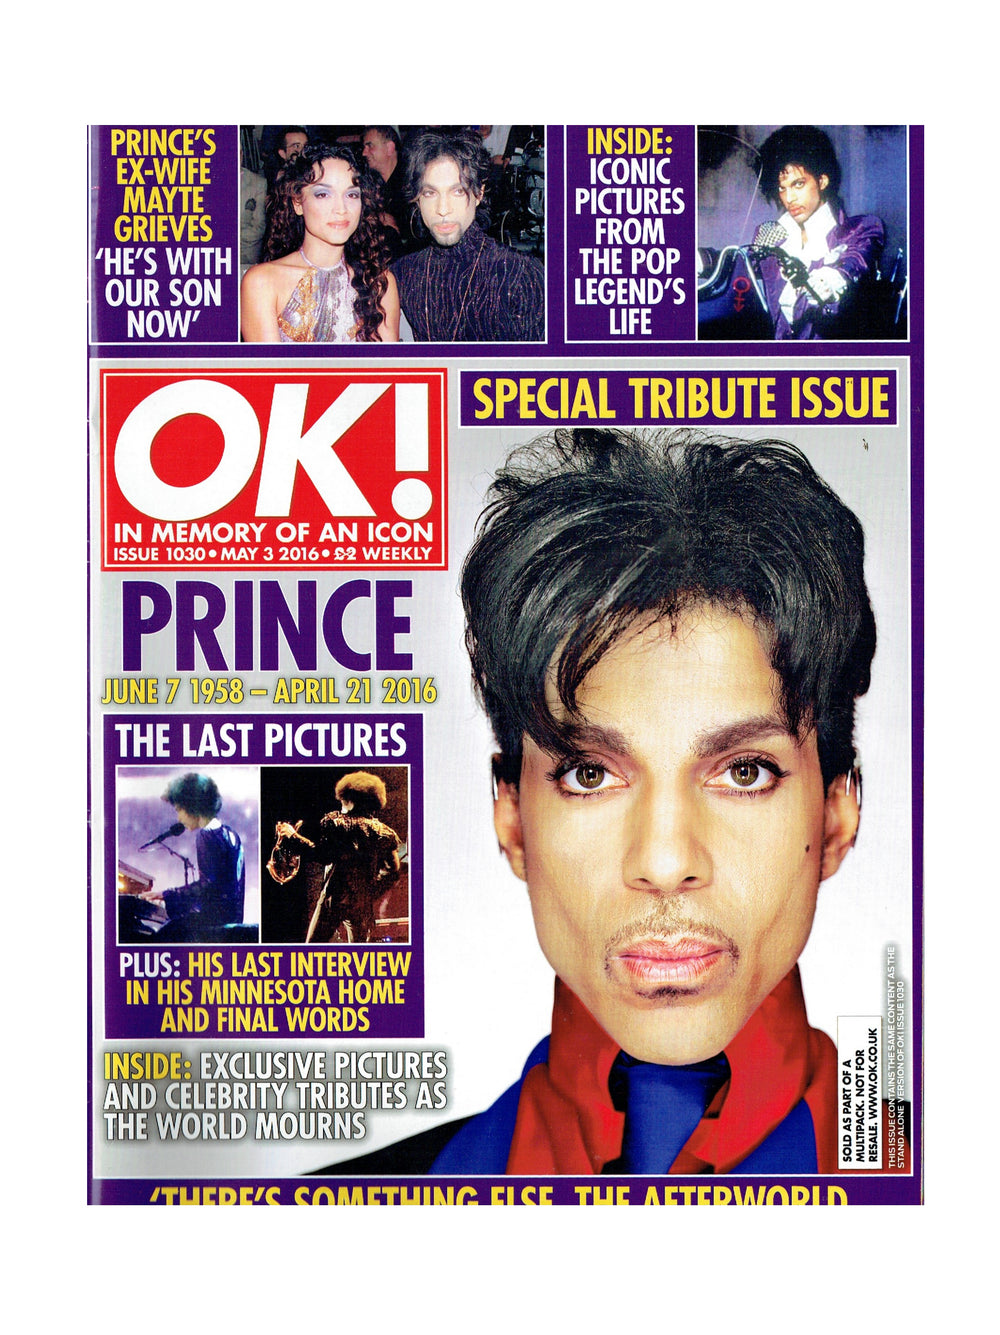 Prince – OK! Magazine Tribute Issue May 2016 Front Cover & 17 Page Article